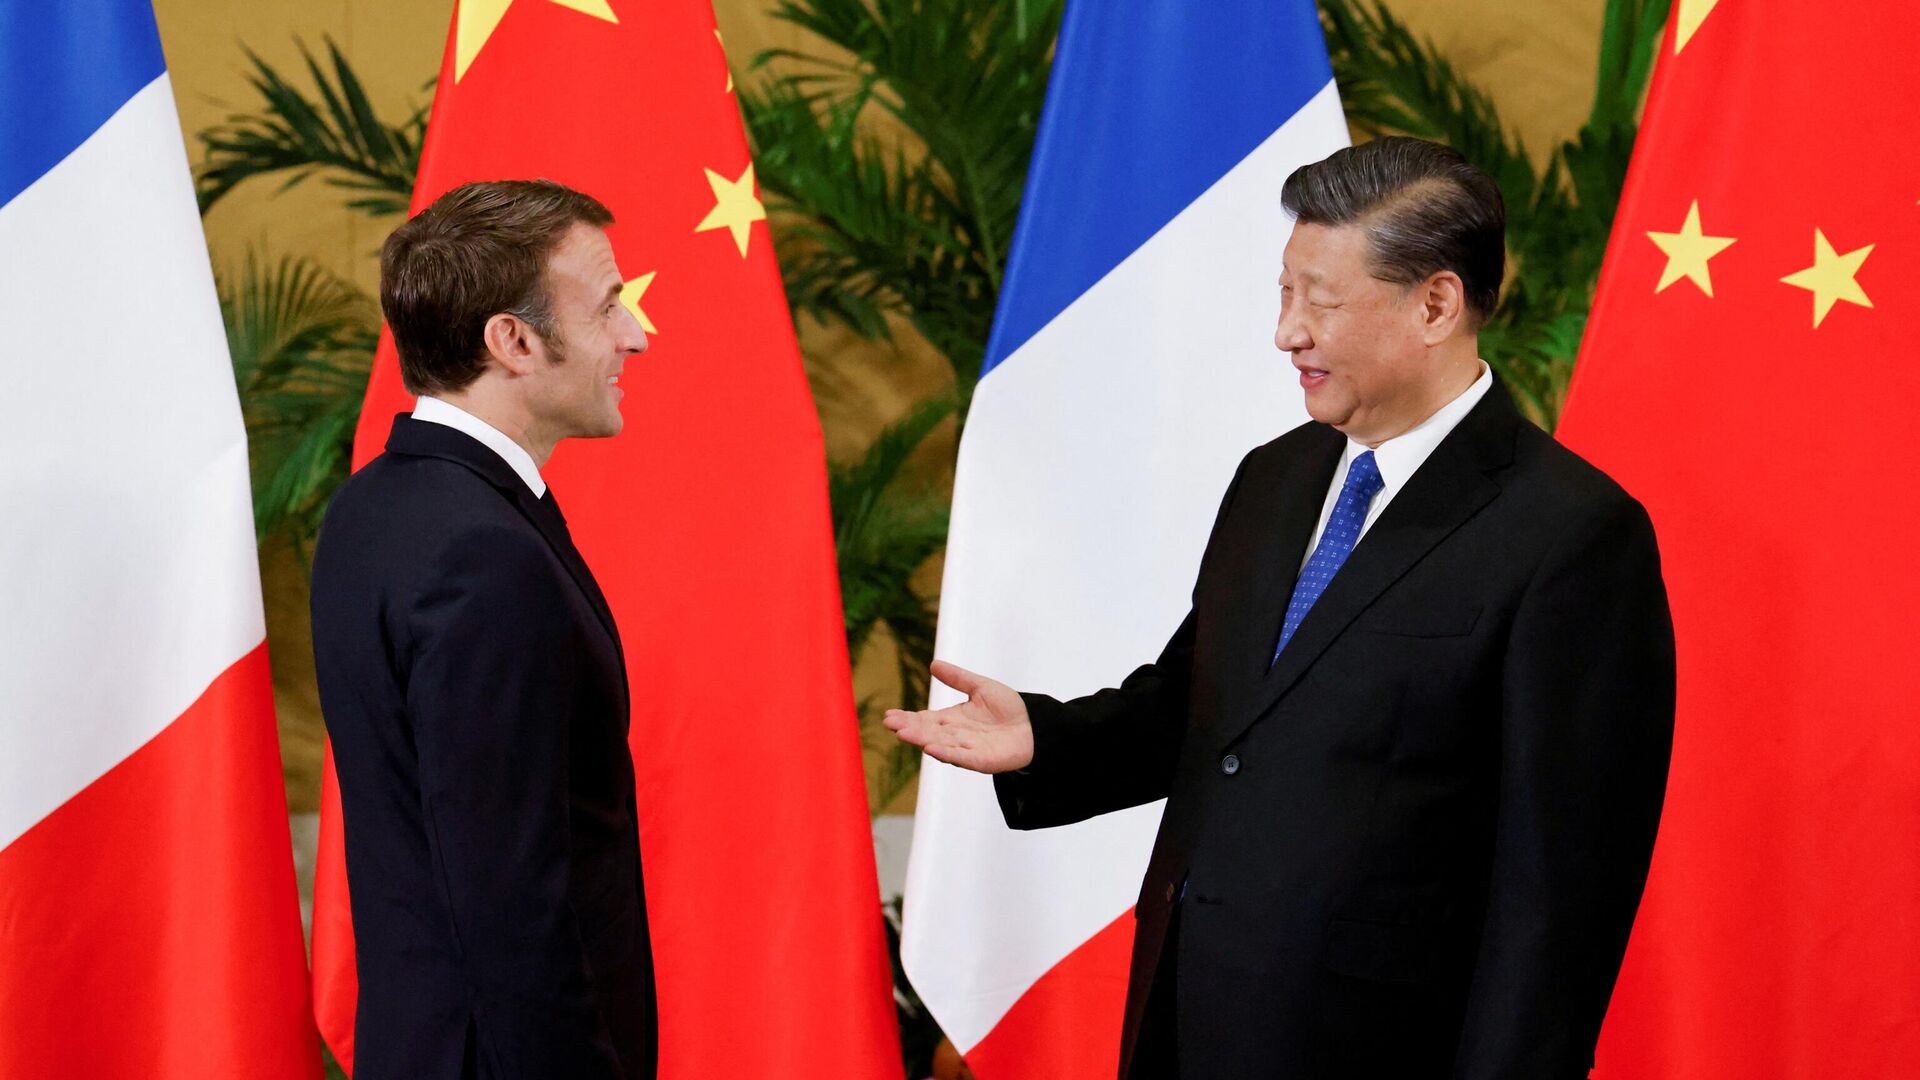 French President Emmanuel Macron (L) meets with Chinese President Xi Jinping on the sidelines of the G20 Summit in Nusa Dua on the Indonesian resort island of Bali on November 15, 2022. - Sputnik International, 1920, 15.11.2022